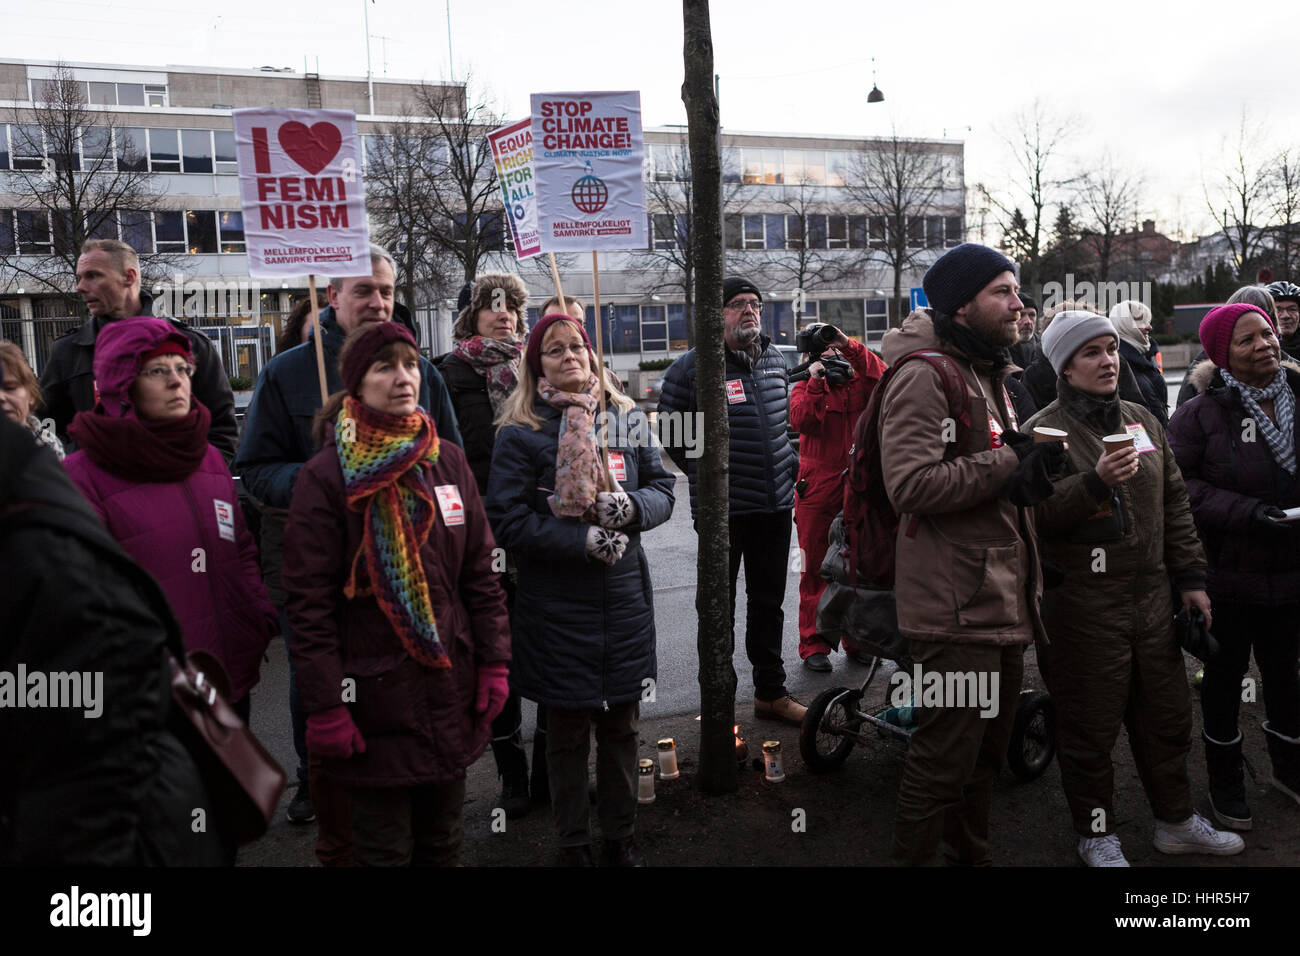 Copenhagen, Denmark. 20th Jan, 2017. Protesters from Greenpeace and Mellemfolkeligt Samvirke gather outside the U.S. Embassy in Copenhagen on the day Donald Trump will be sworn in as the President of the United States of America. The protesters wish the say no to Trump's road to power and his racist, sexist and ultra-nationalistic, climate hostile and hateful opinions. Credit: Gonzales Photo/Alamy Live News Stock Photo